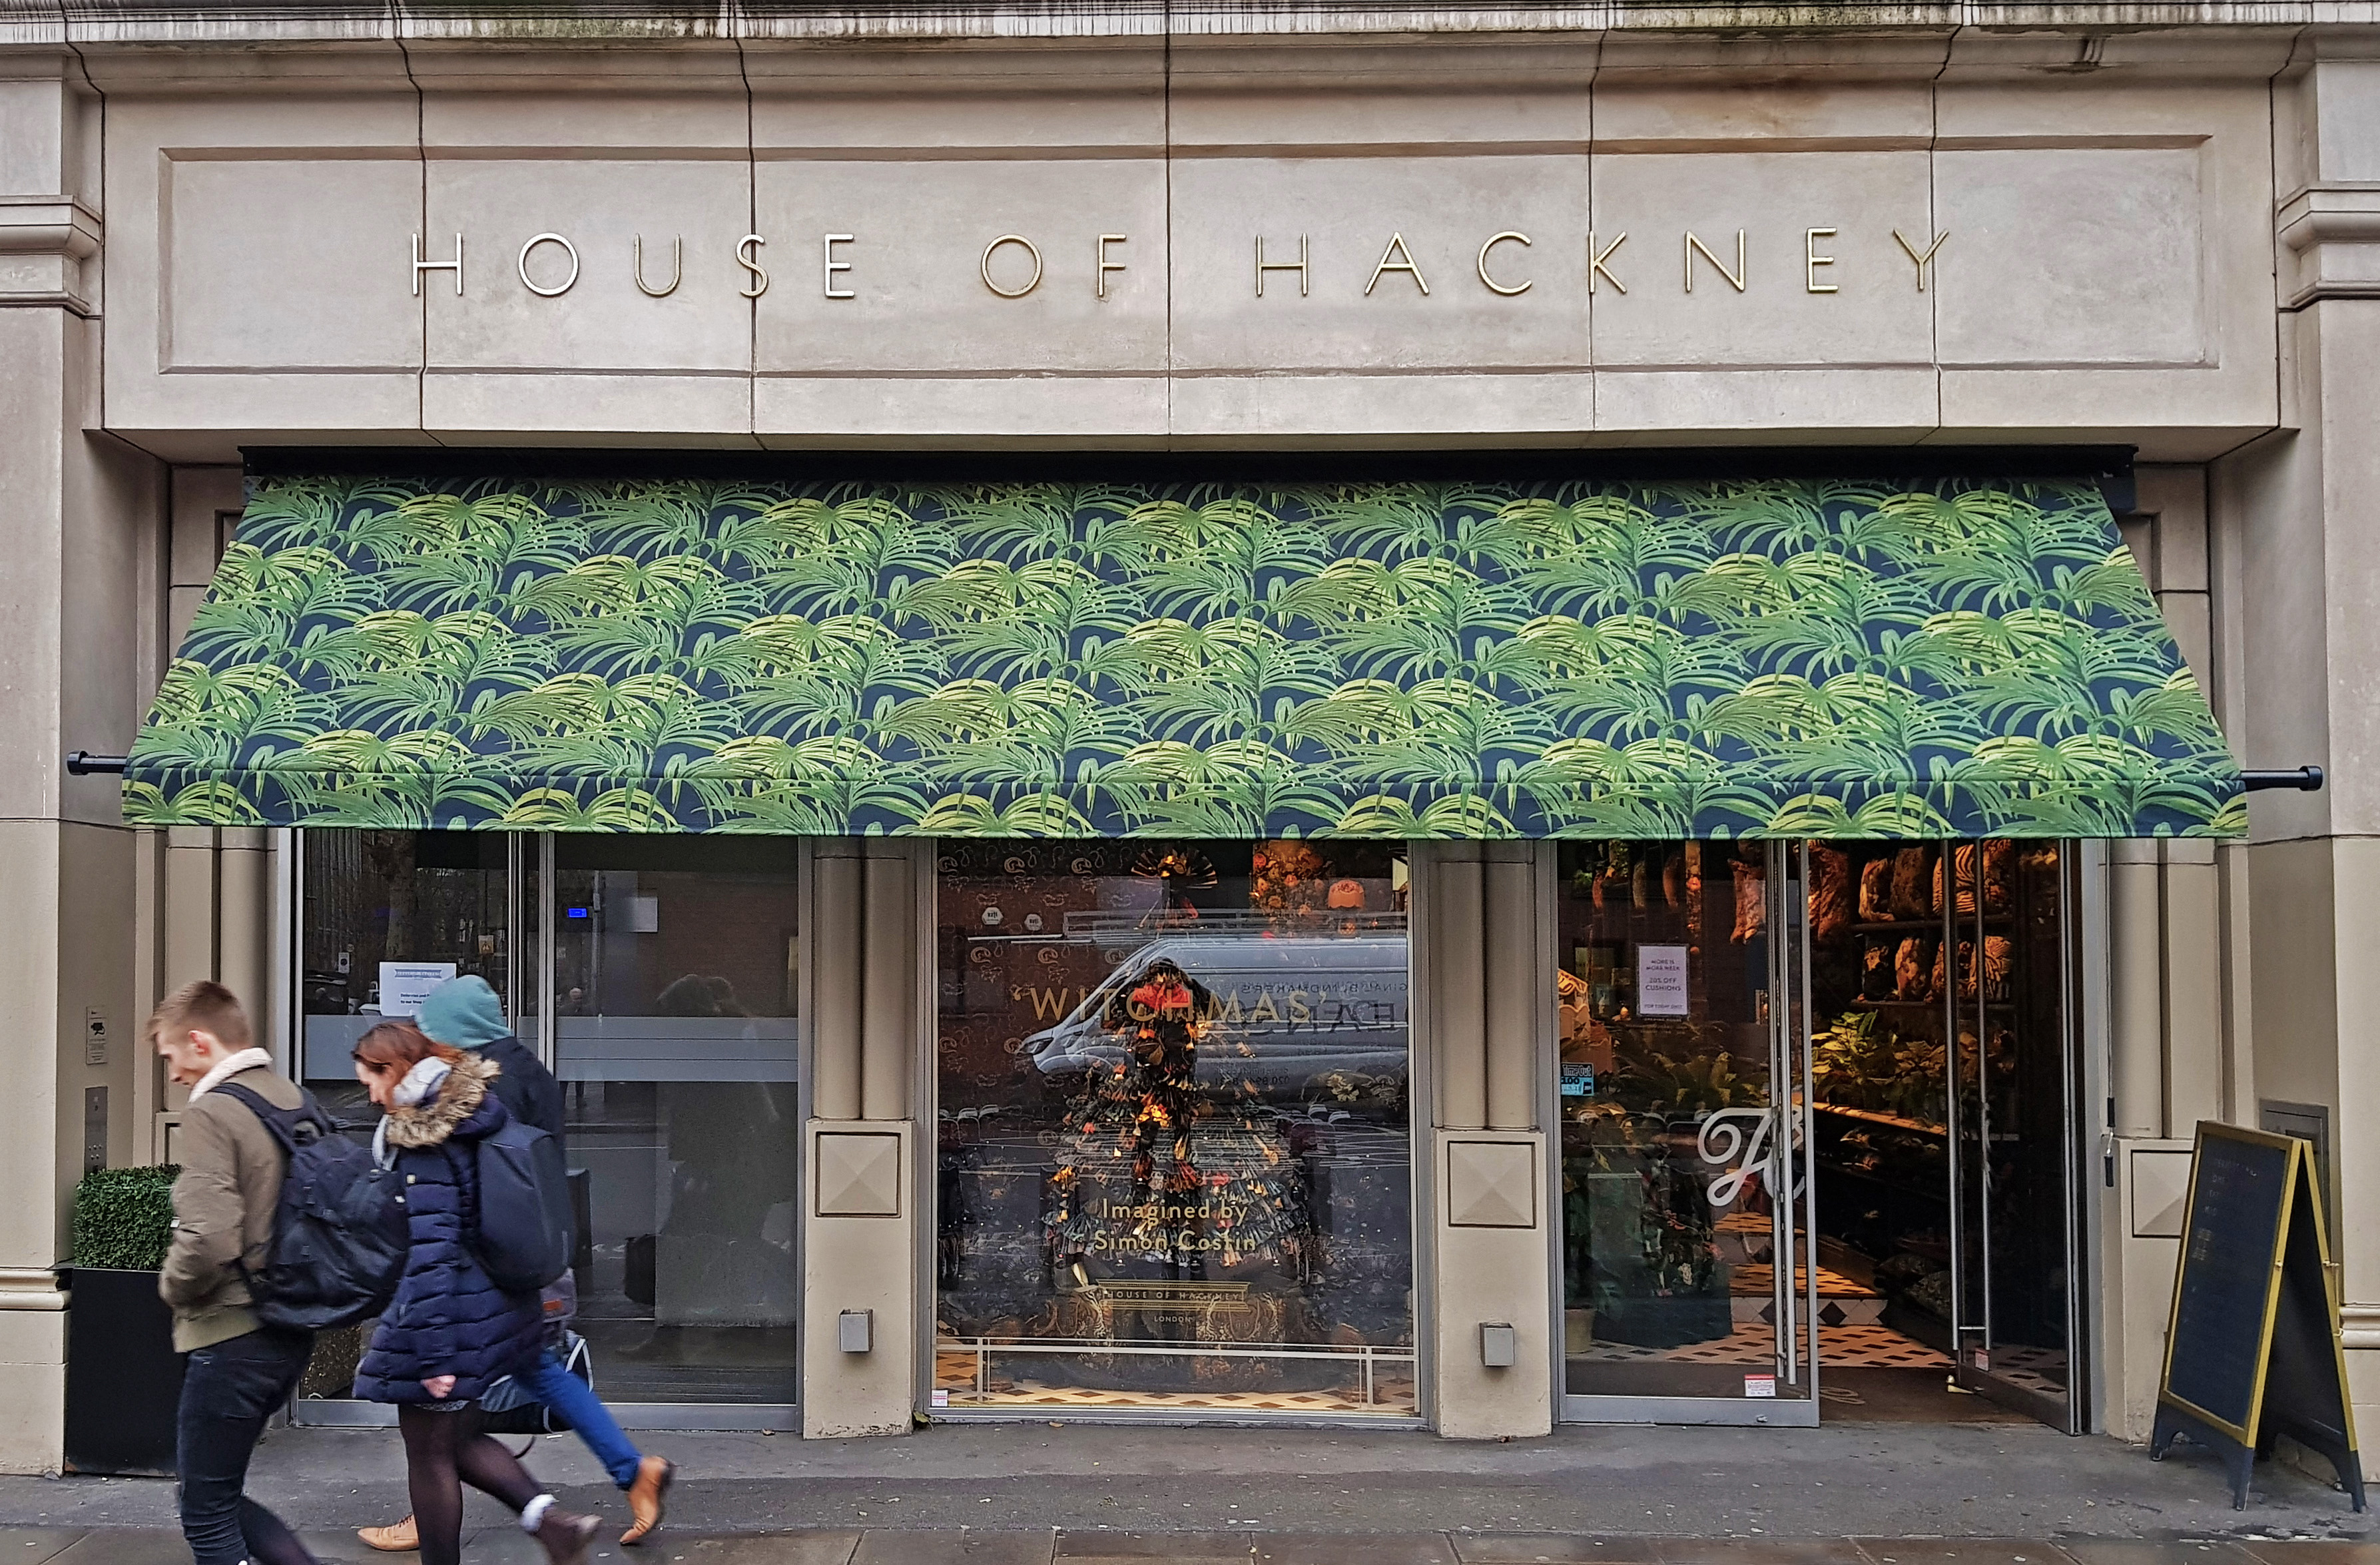 Greenwich awning at House of Hackney